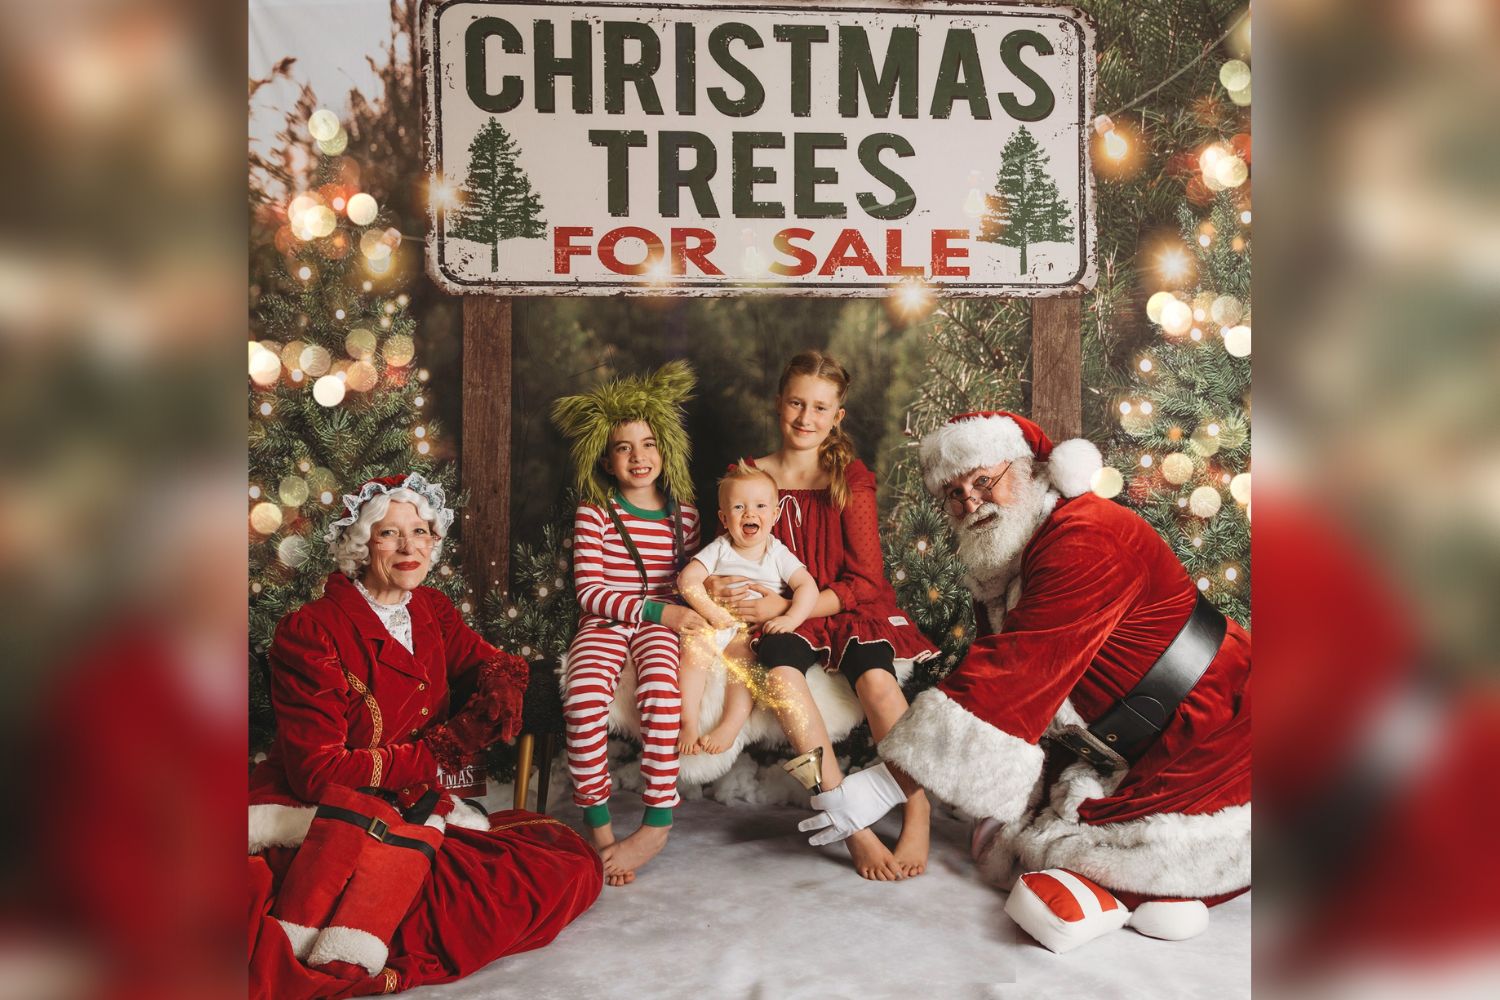 siblings taking Christams photo with Santa under Christams tree